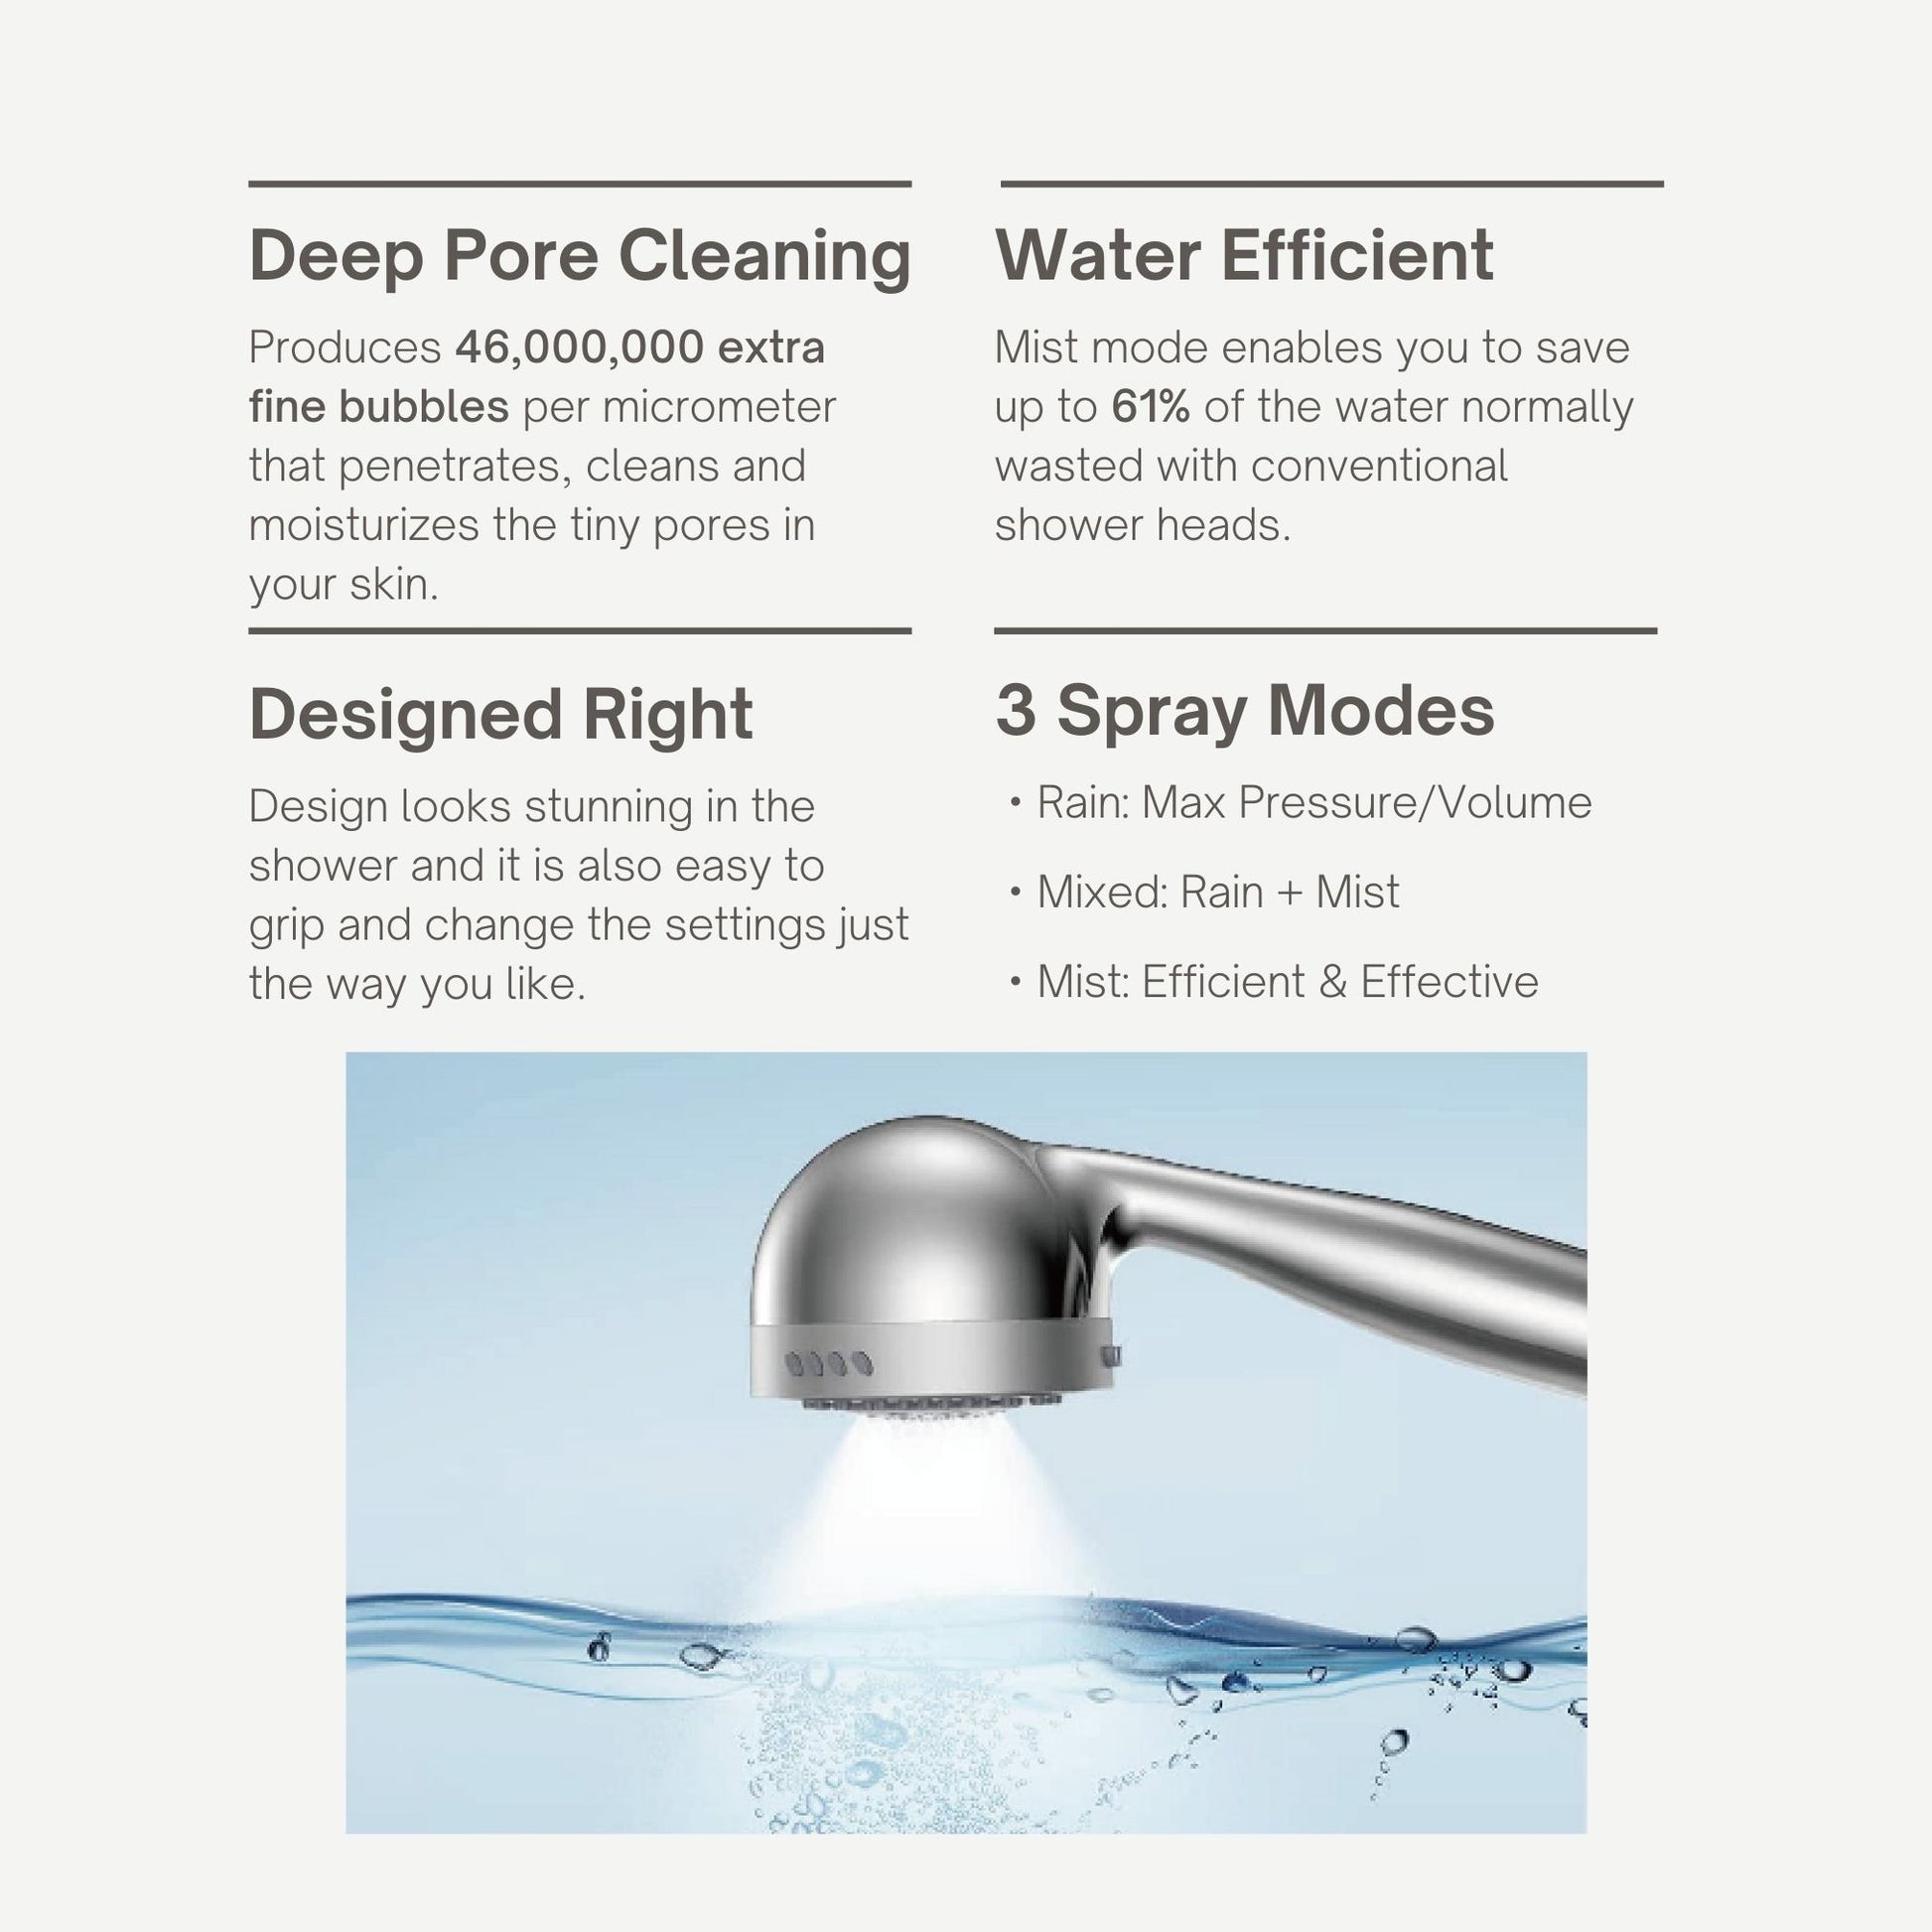 Graphic advertisement showing picture of shower head spraying into the water explaining its features such as deep pore cleaning, water efficiency, stunning design and three spray modes 